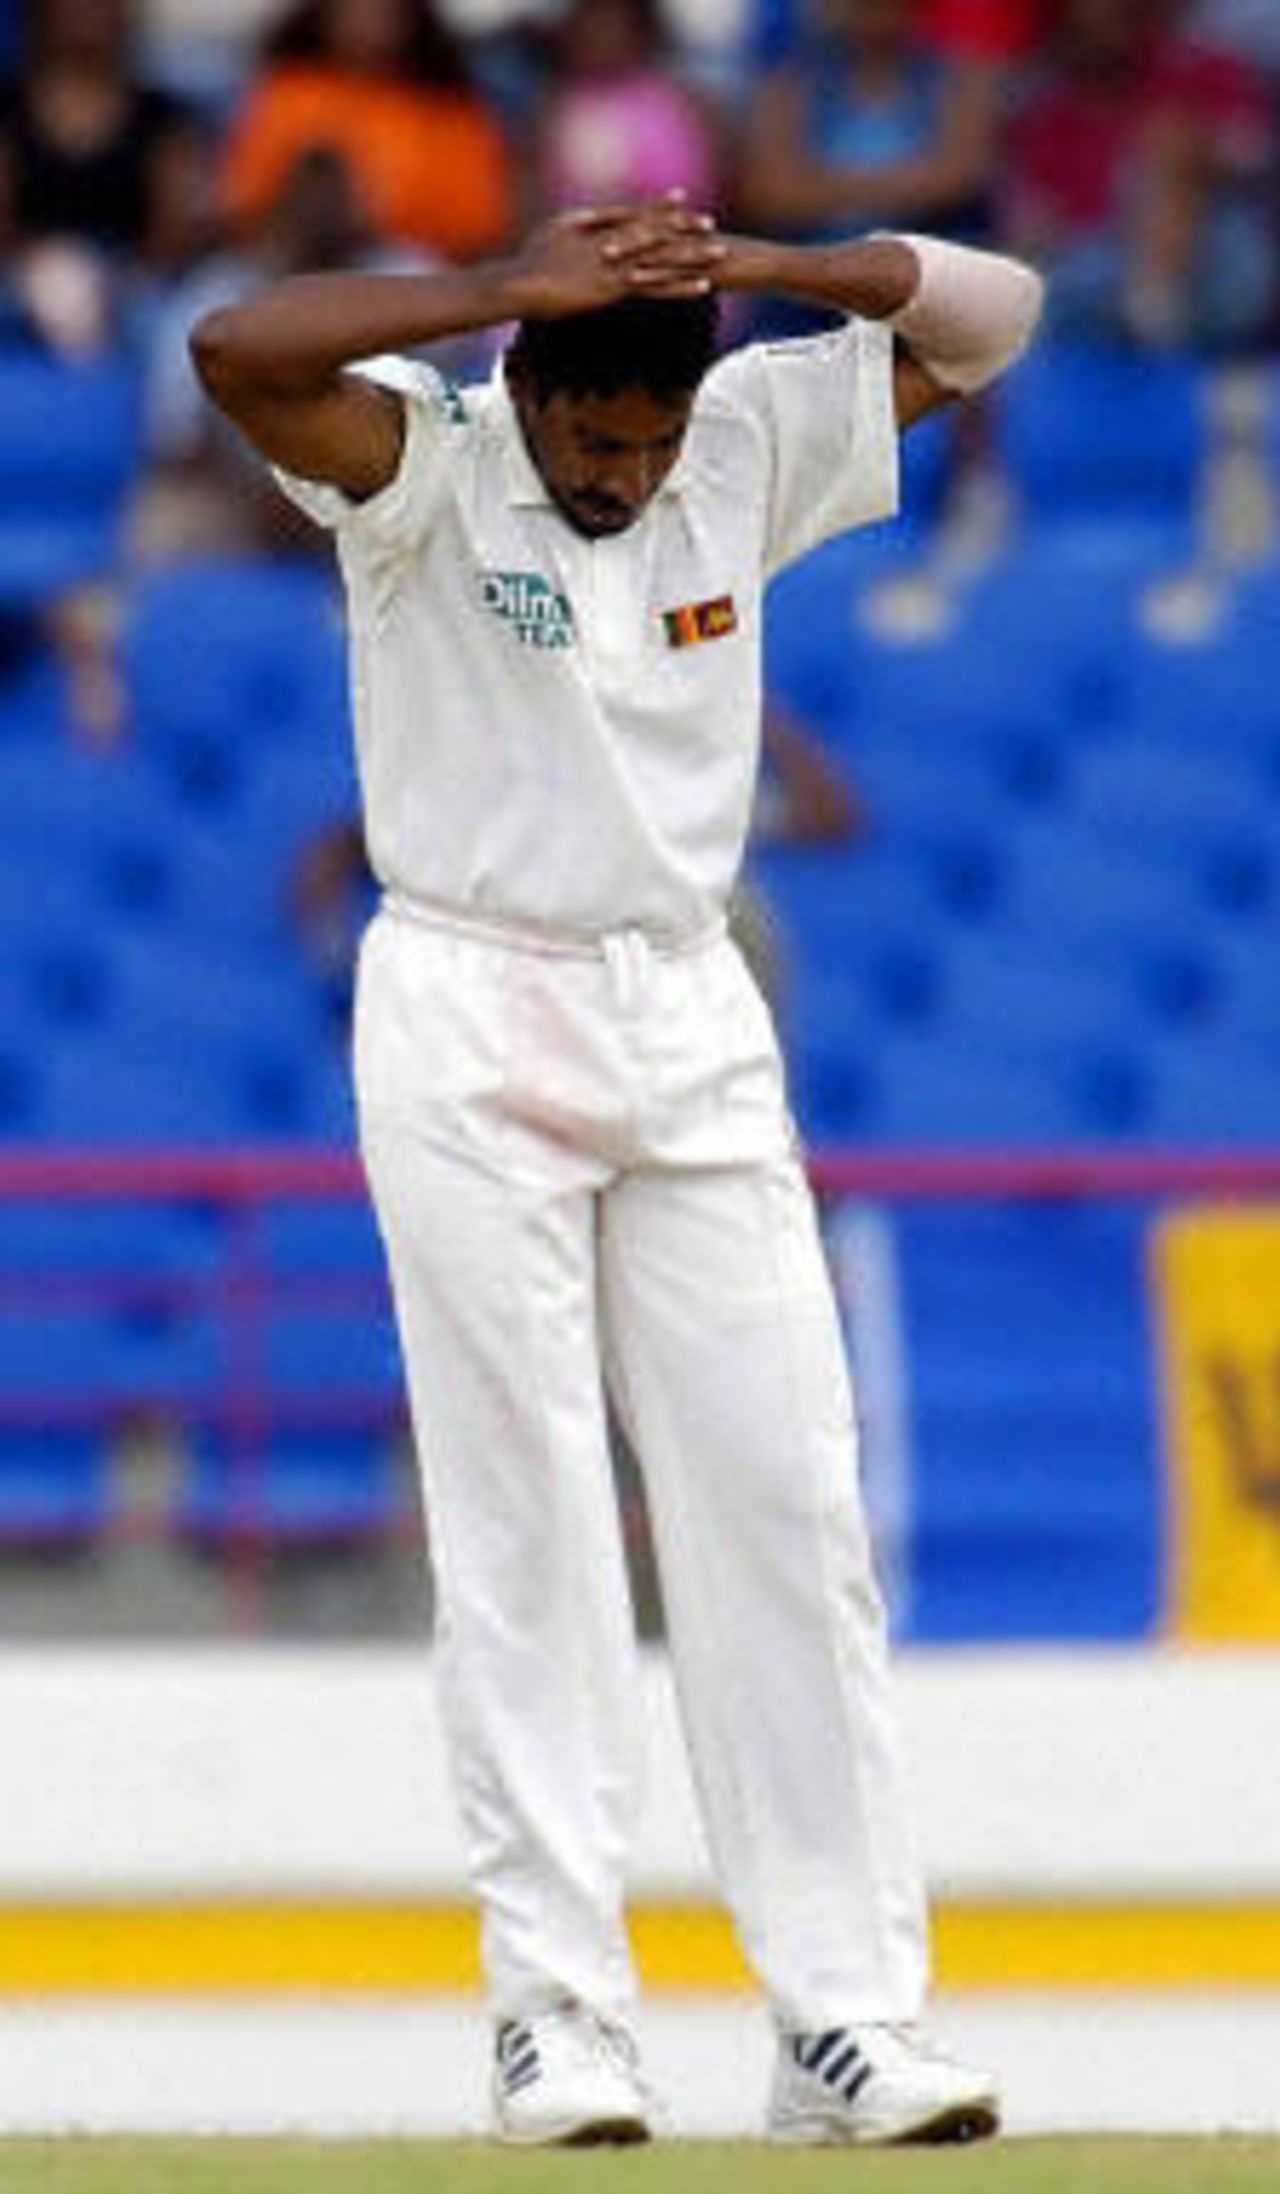 Chaminda Vaas shows disappointment against West Indies' captain Brian Lara LBW on the third day of the first test match at St Lucia.